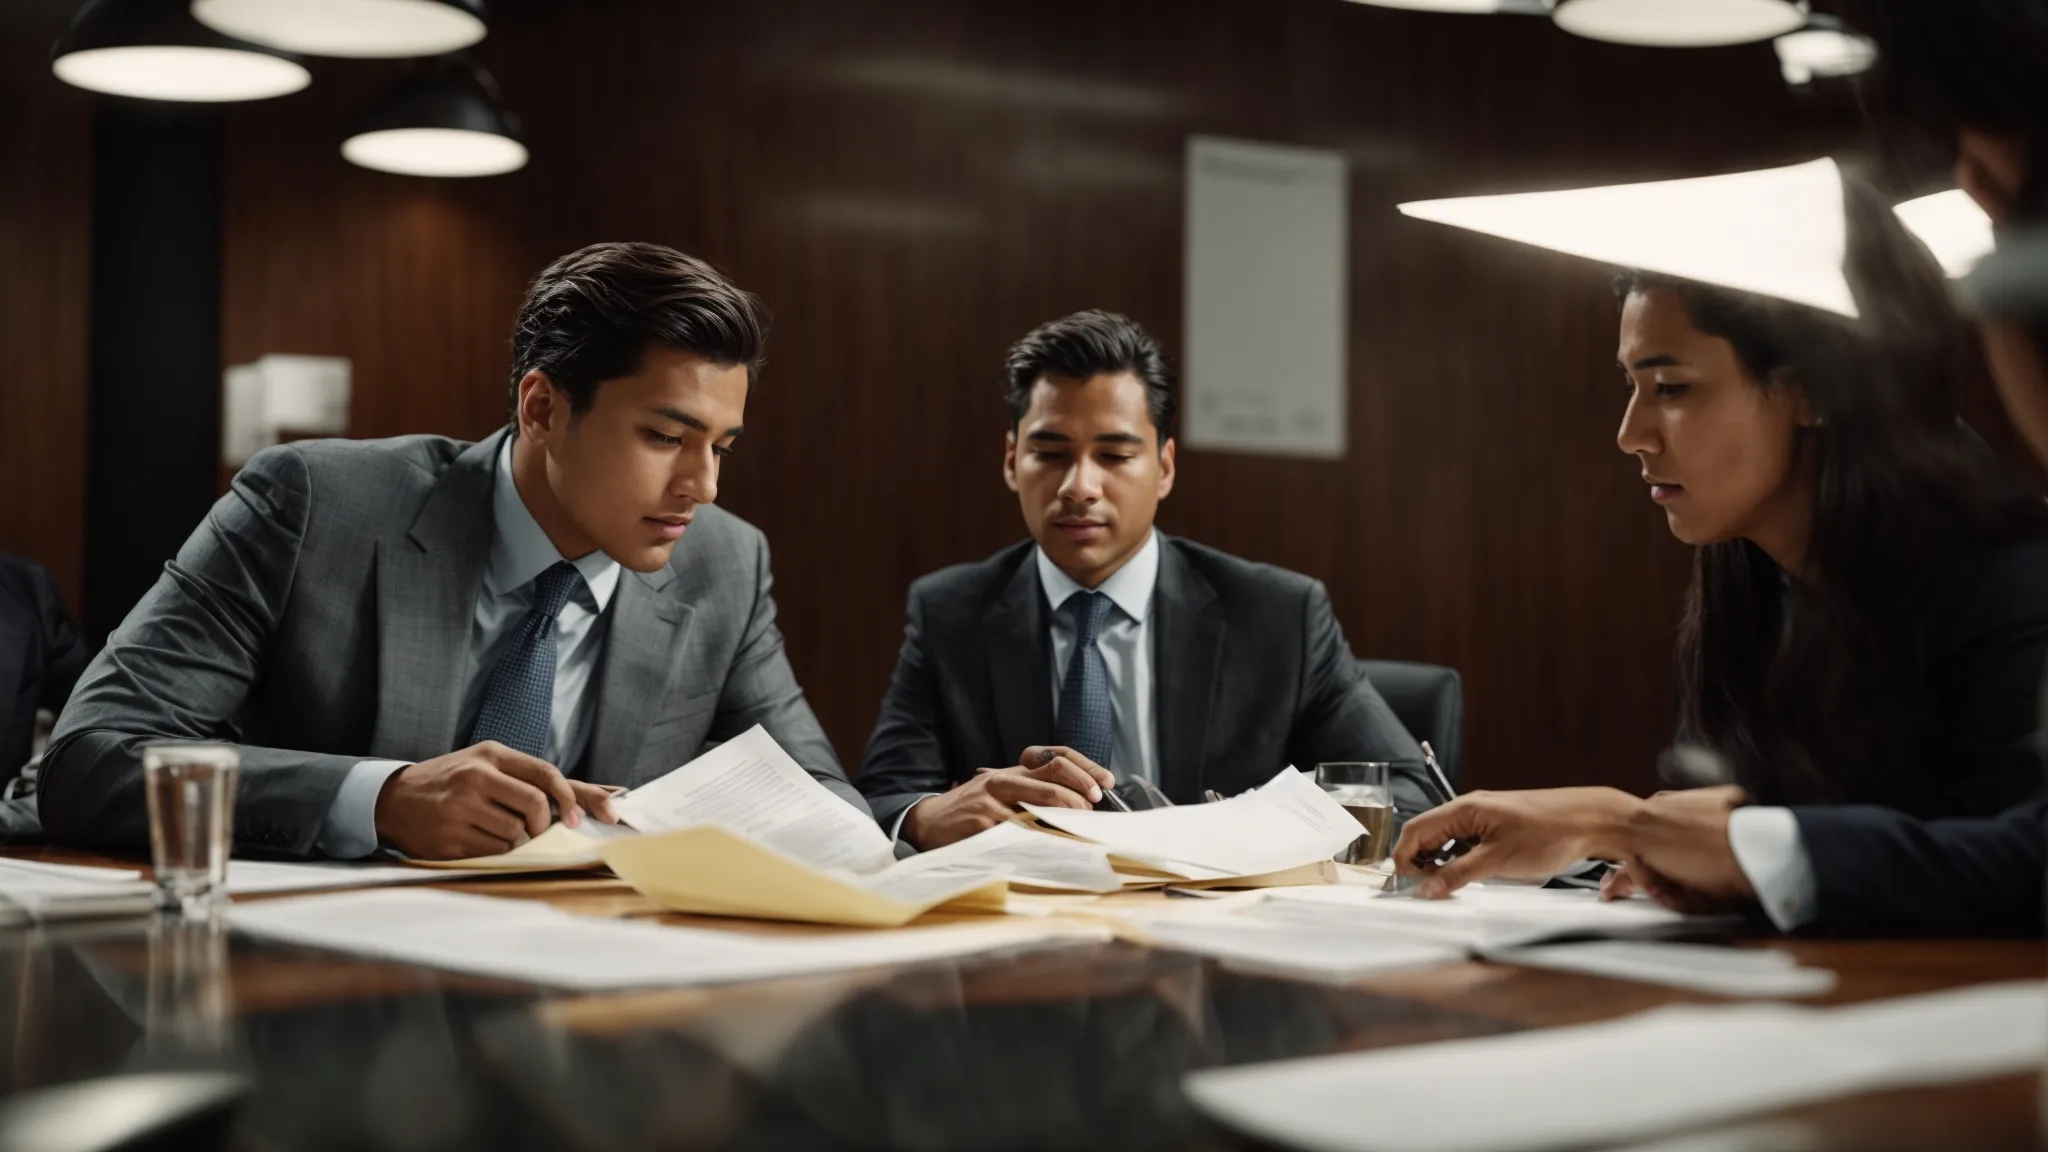 two professionals engaging in a heated discussion across a conference table with legal documents scattered about.